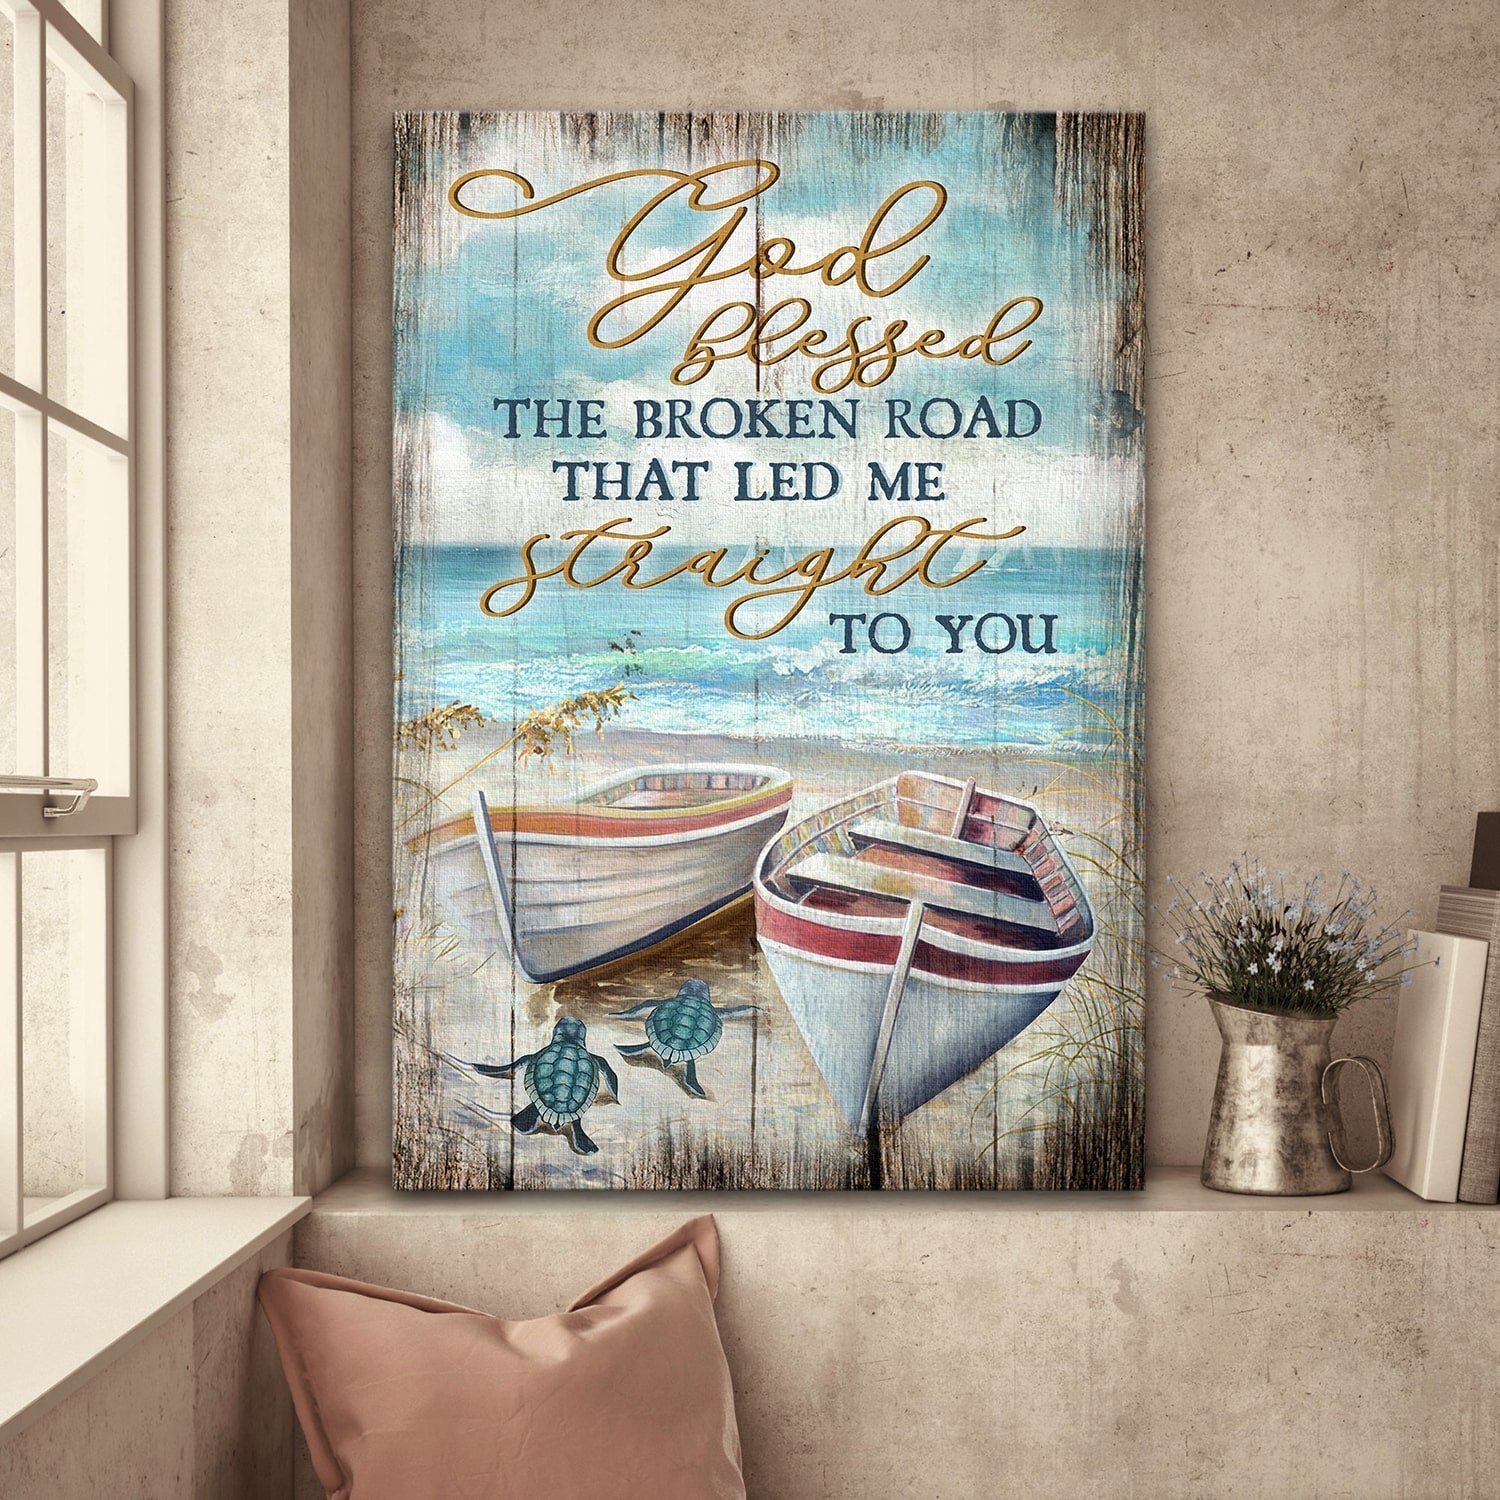 Couple Portrait Canvas- Boat, Little Turtle, Sand Beach canvas- Gift for Couple, Lover- God blessed the broken road that led me to you - Portrait Canvas Prints, Wall Art